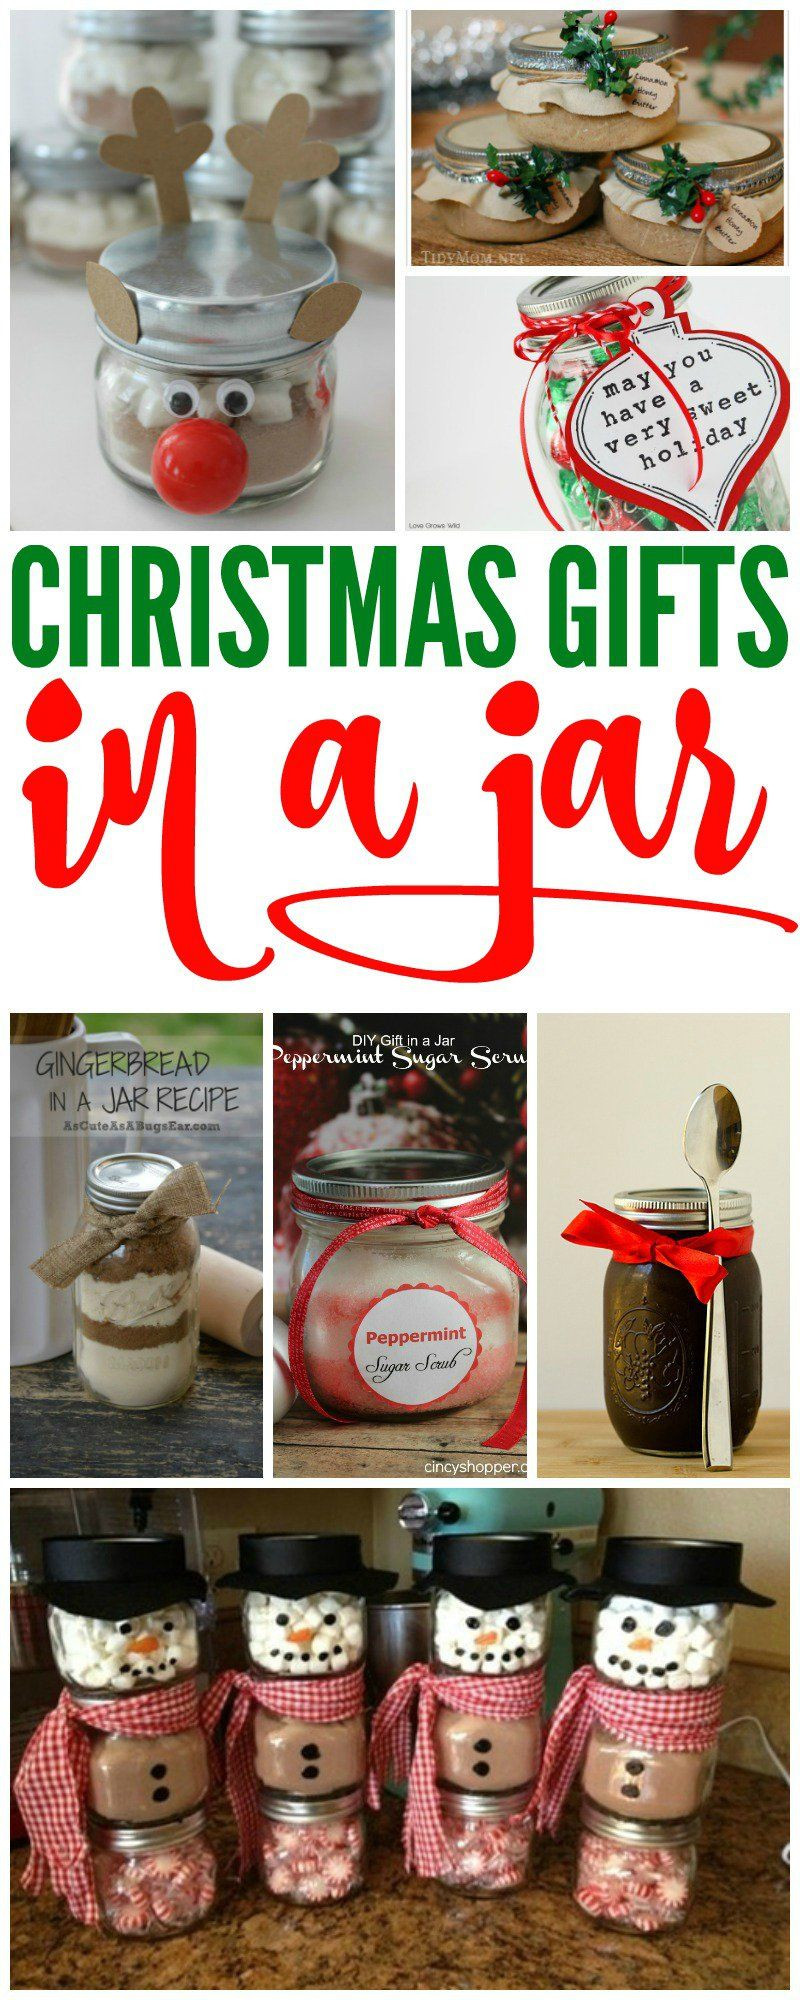 Friends Christmas Gift
 Christmas Gift in Jars If you are looking for Cheap